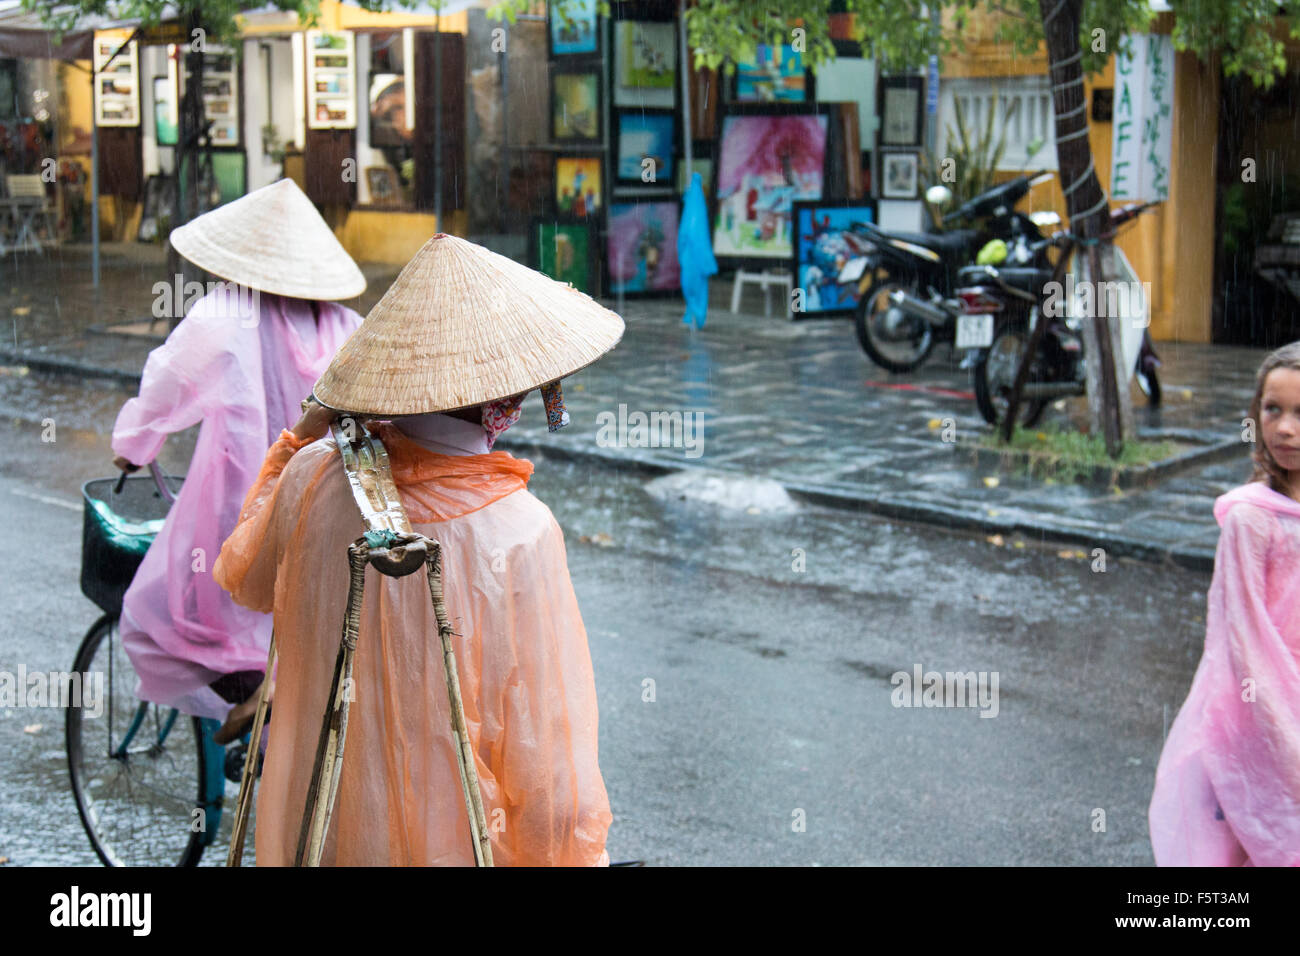 Hoi An old town in Vietnam. Wet season and heavy rains in the town. Young western tourist looking at vietnamese street vendor Stock Photo